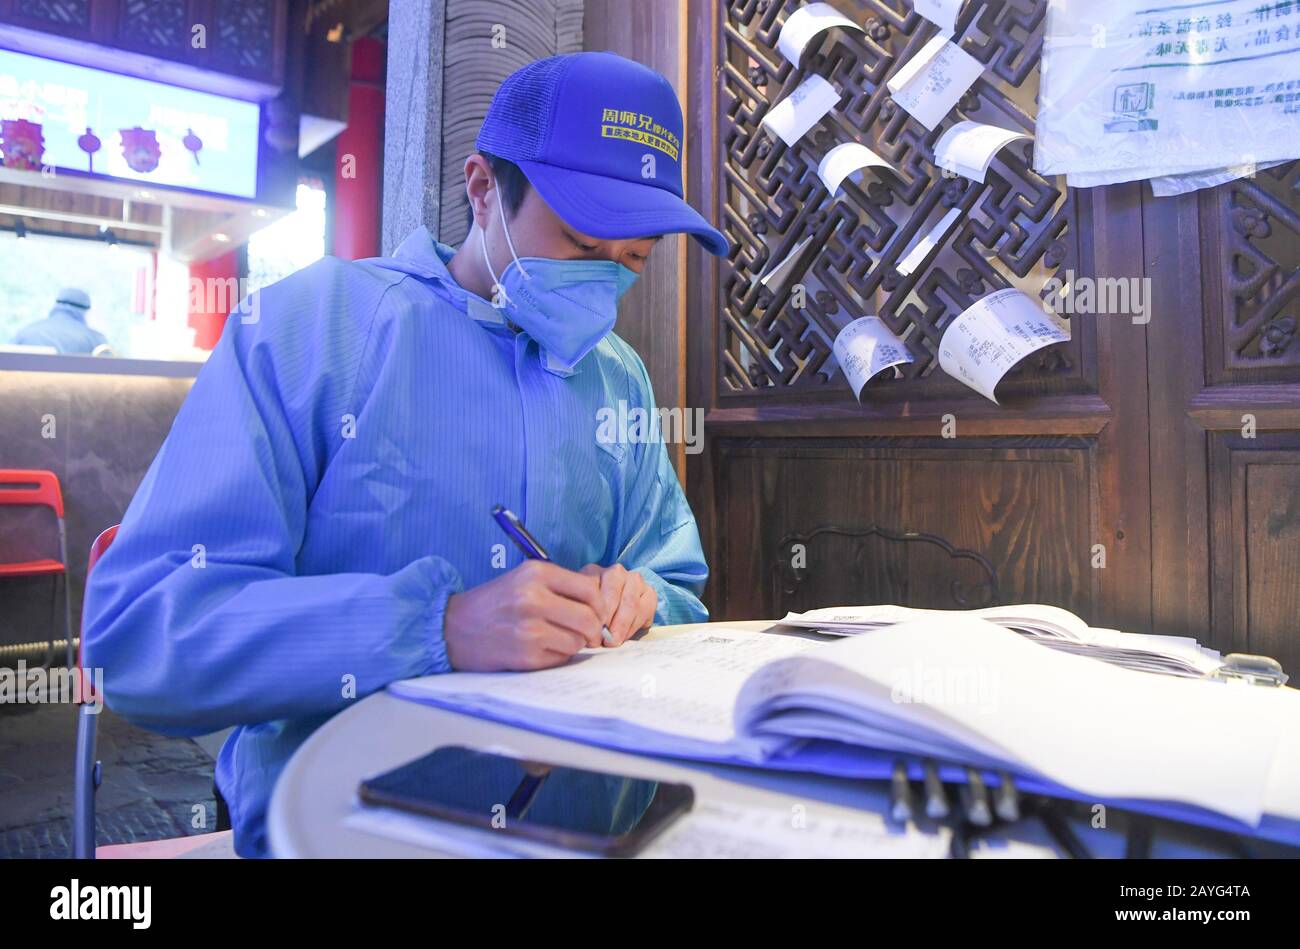 (200215) -- CHONGQING, Feb. 15, 2020 (Xinhua) -- A staff member of a hot pot restaurant records information of takeout food in southwest China's Chongqing Municipality, Feb. 15, 2020. For the prevention and control of novel coronavirus pneumonia, some hot pot restaurants in Chongqing, under the guidance of Chongqing Municipal Commerce Commission and relevant departments, provide consumers with zero-contact hot pot takeout service. Consumers can order food through various platforms such as telephone, WeChat and the Internet. The takeout services were strengthened in the safety of purchase, proc Stock Photo